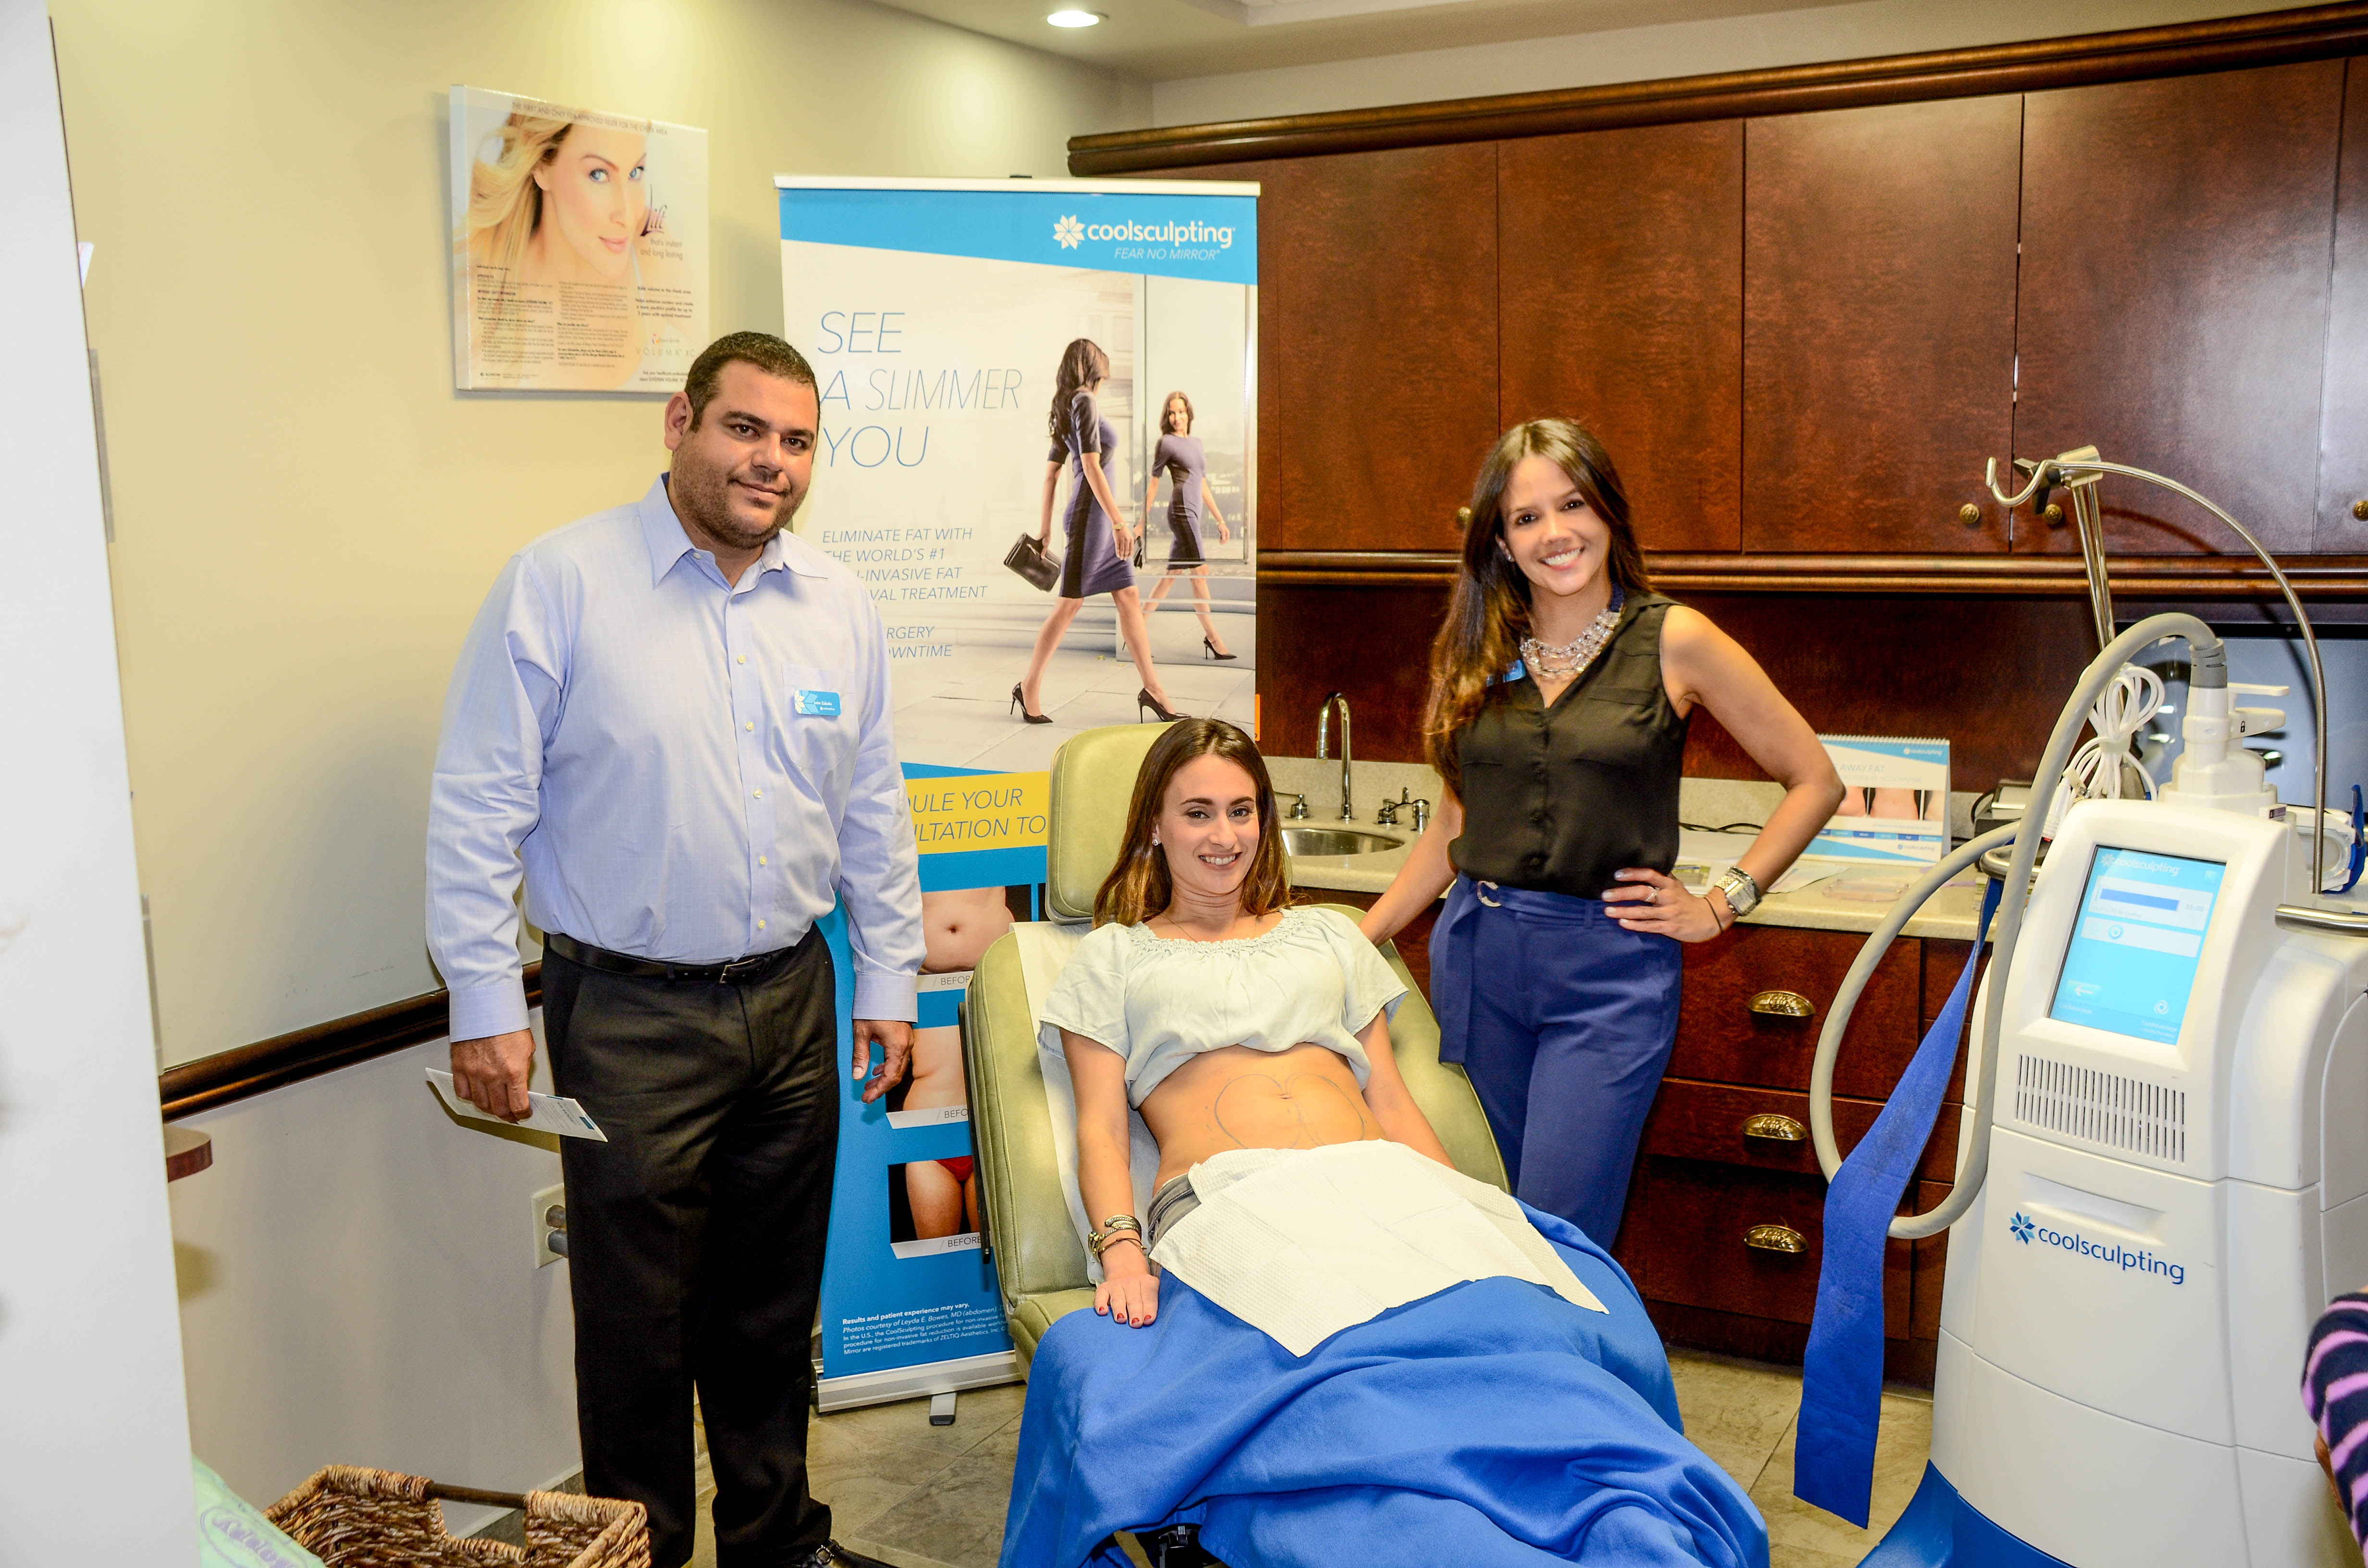 Patient prepping to receive coolsculpting treatment